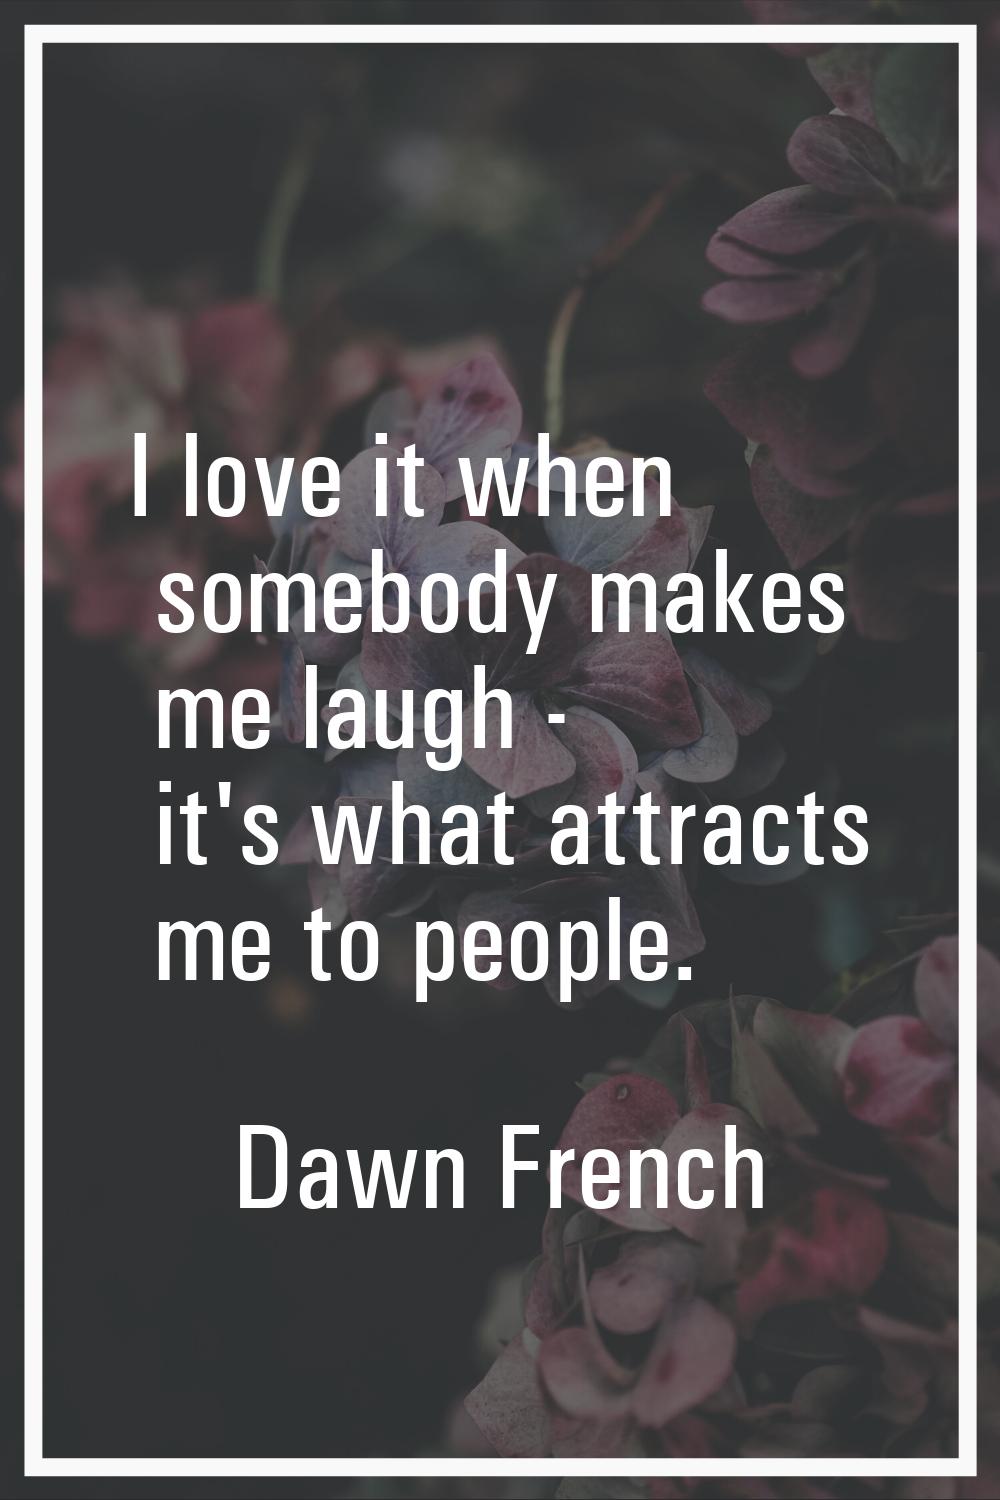 I love it when somebody makes me laugh - it's what attracts me to people.